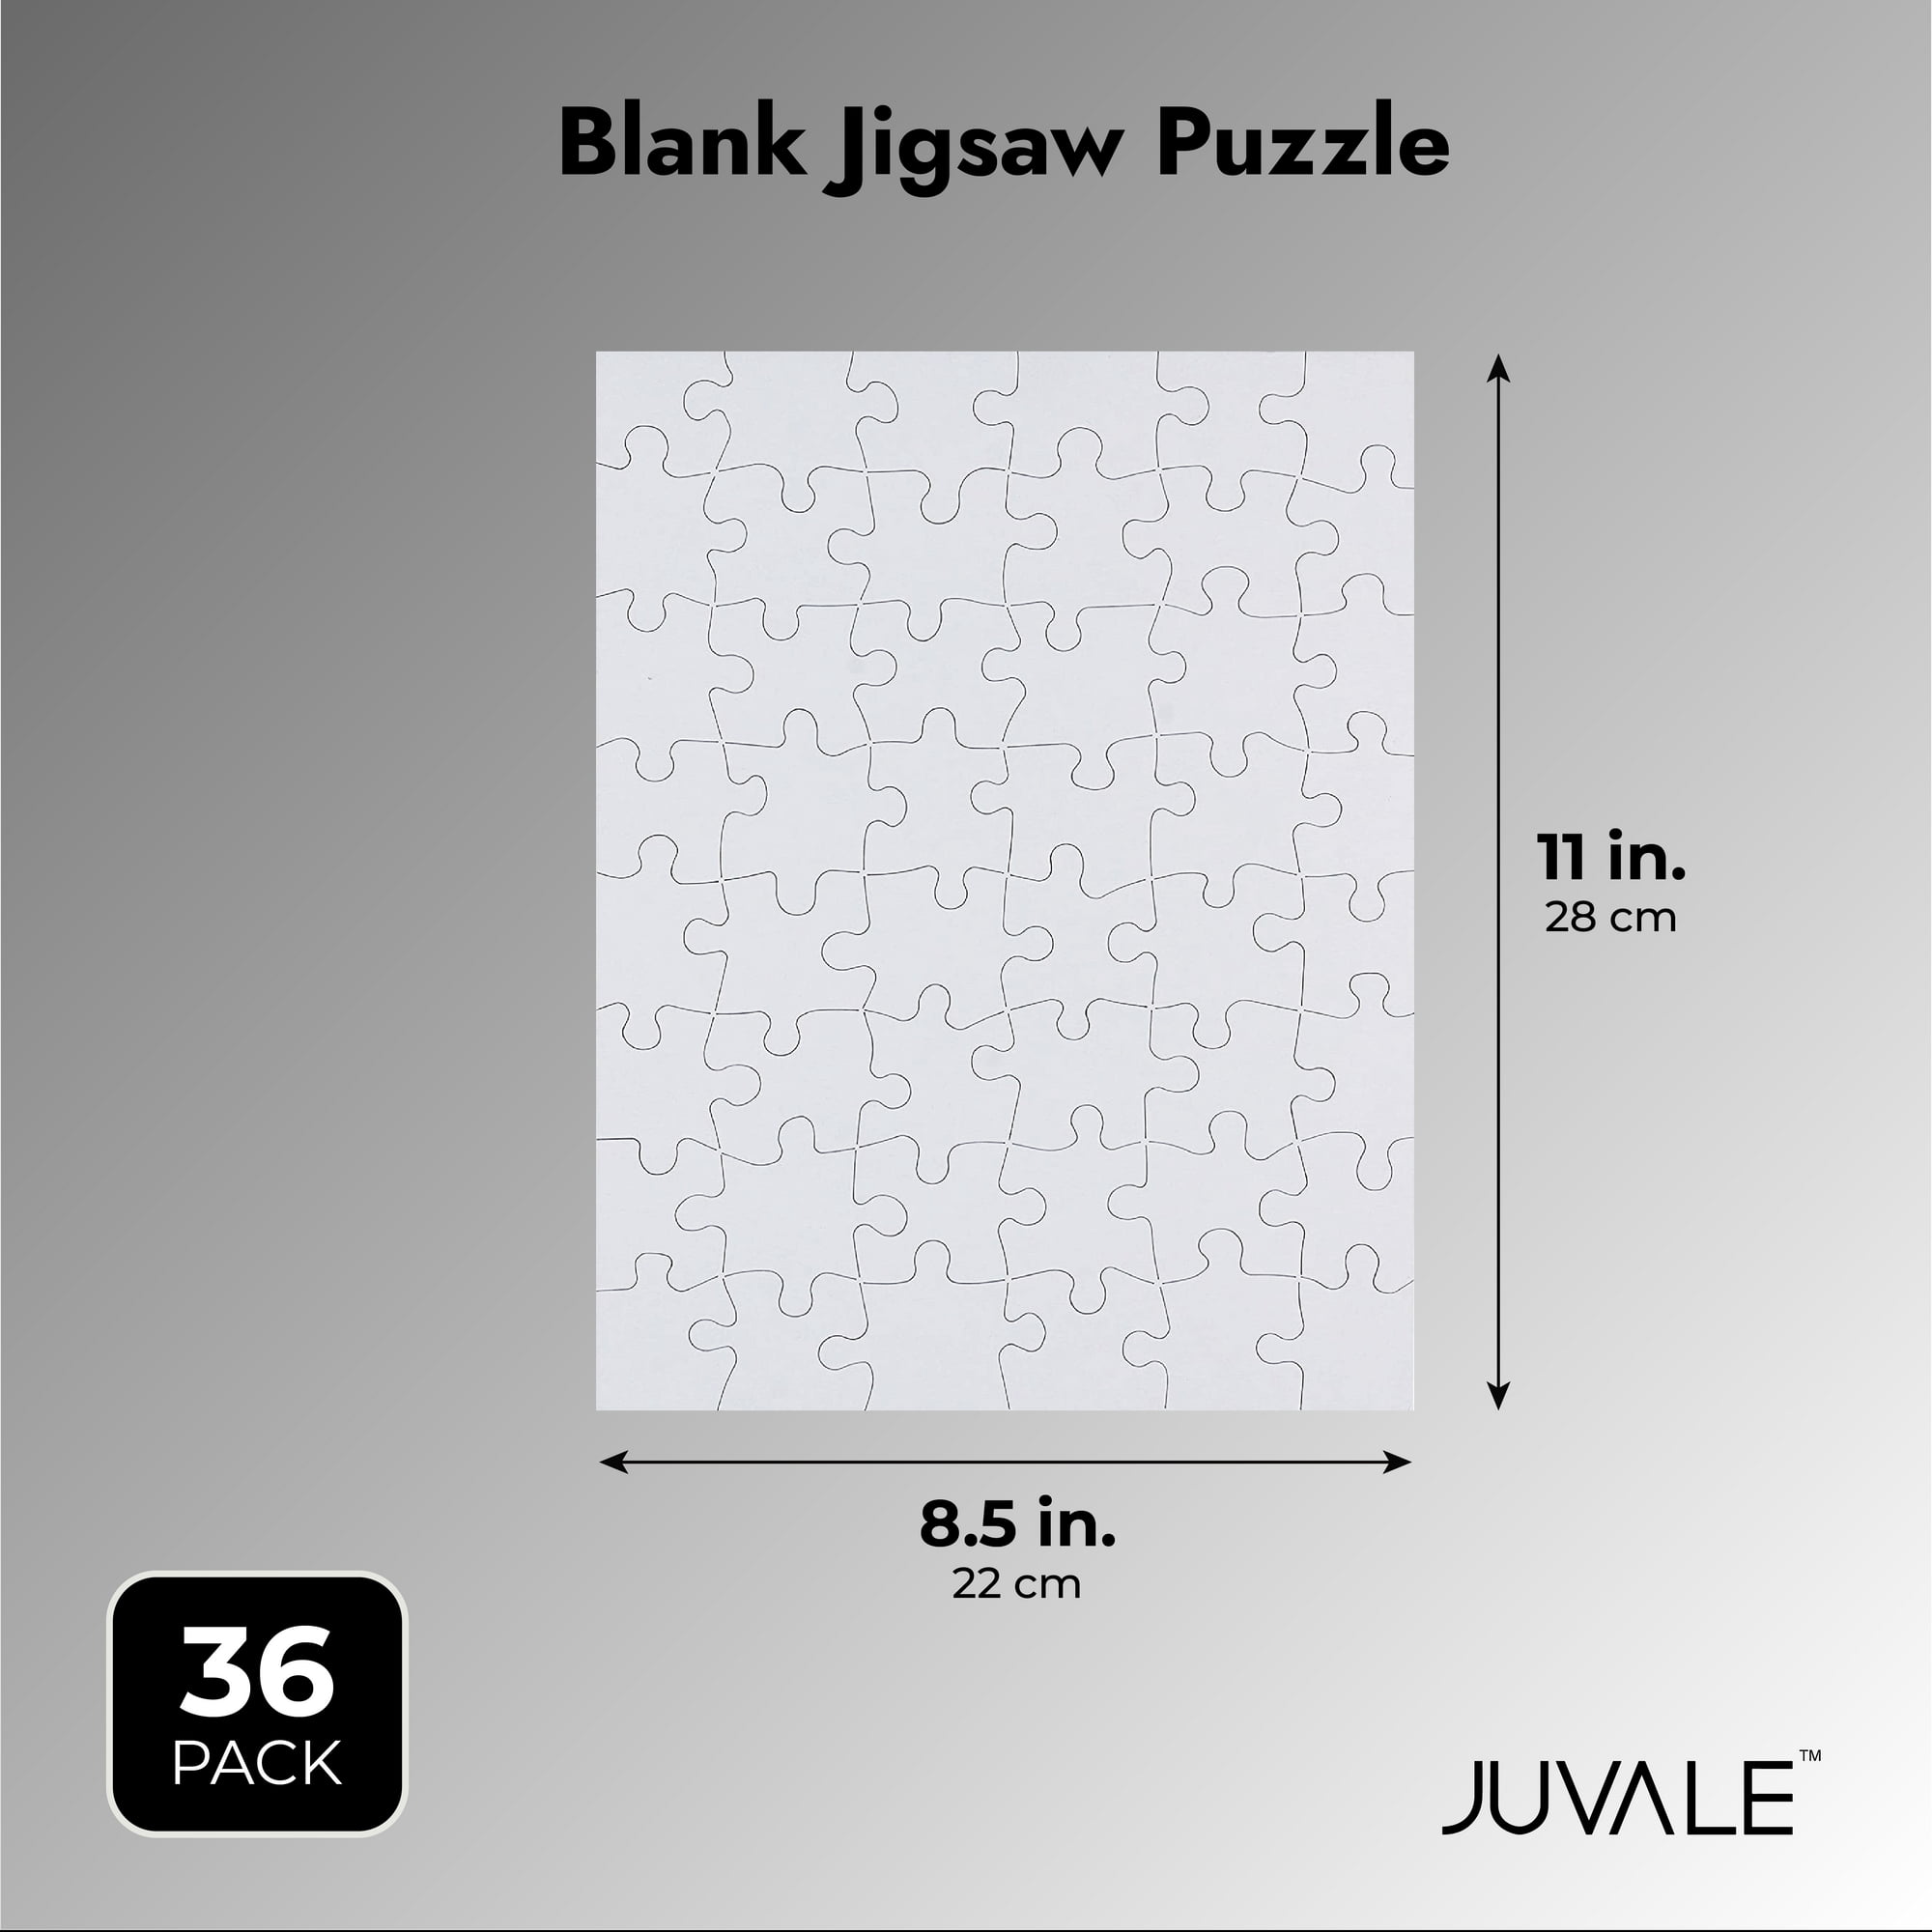 Bright Creations 24 Sheets Blank Puzzles to Draw On Bulk, 5.5 x 4 Inch  Jigsaw Puzzle Pieces for DIY, Arts and Crafts Projects